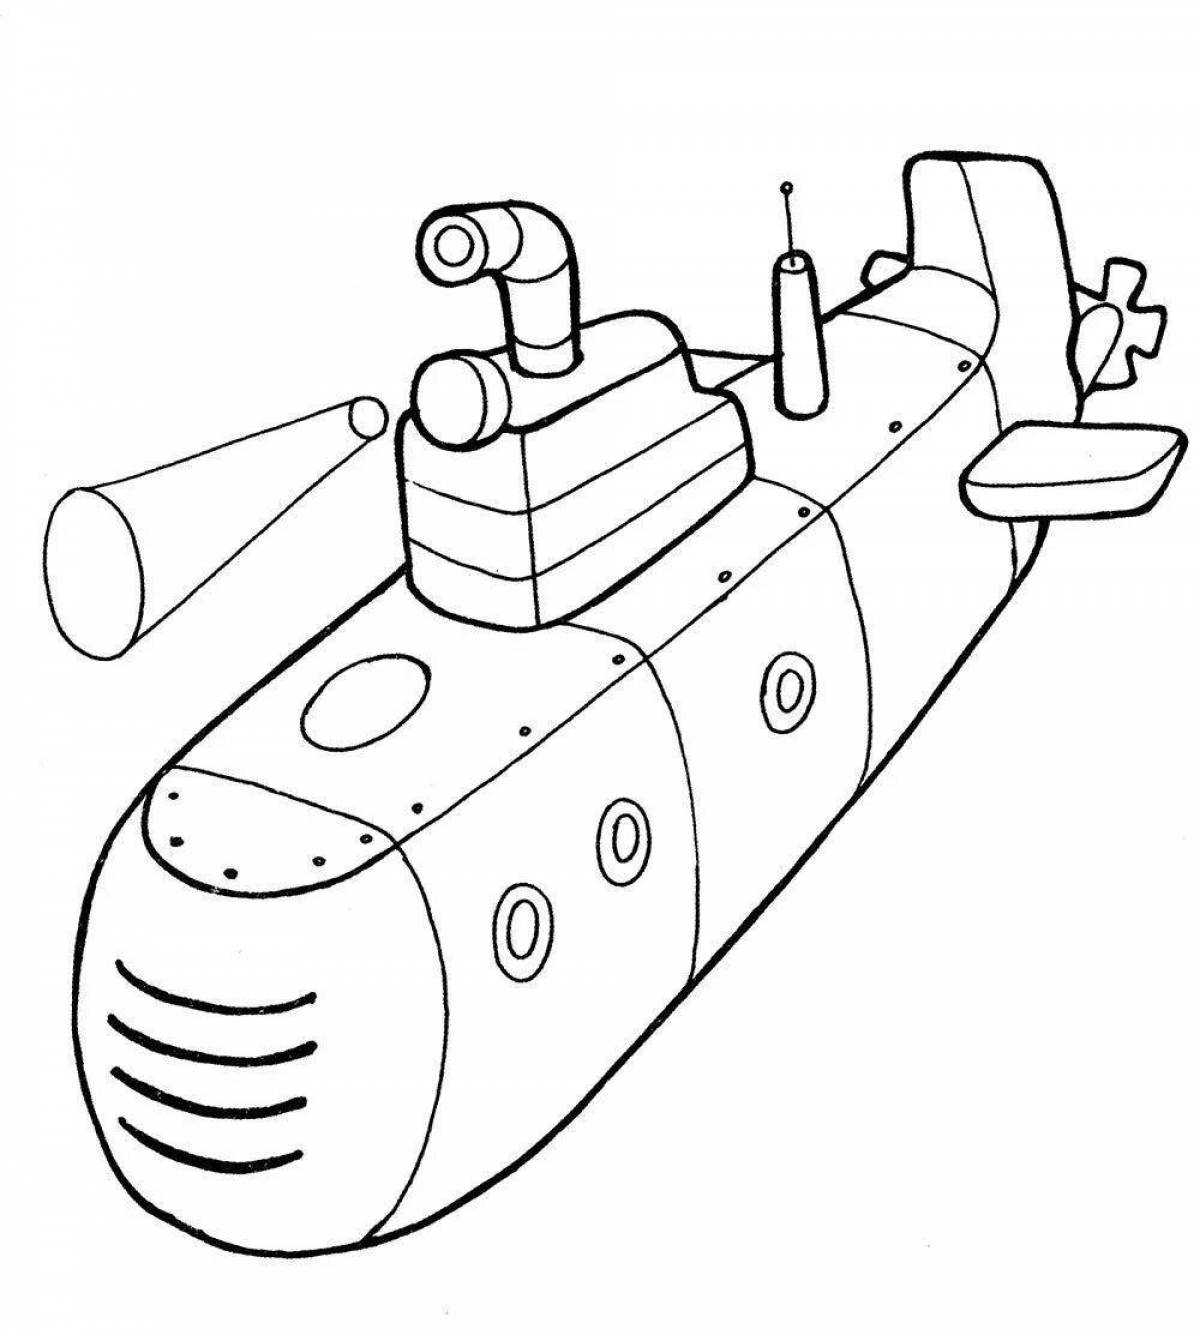 Exquisite warship coloring book for 5-6 year olds